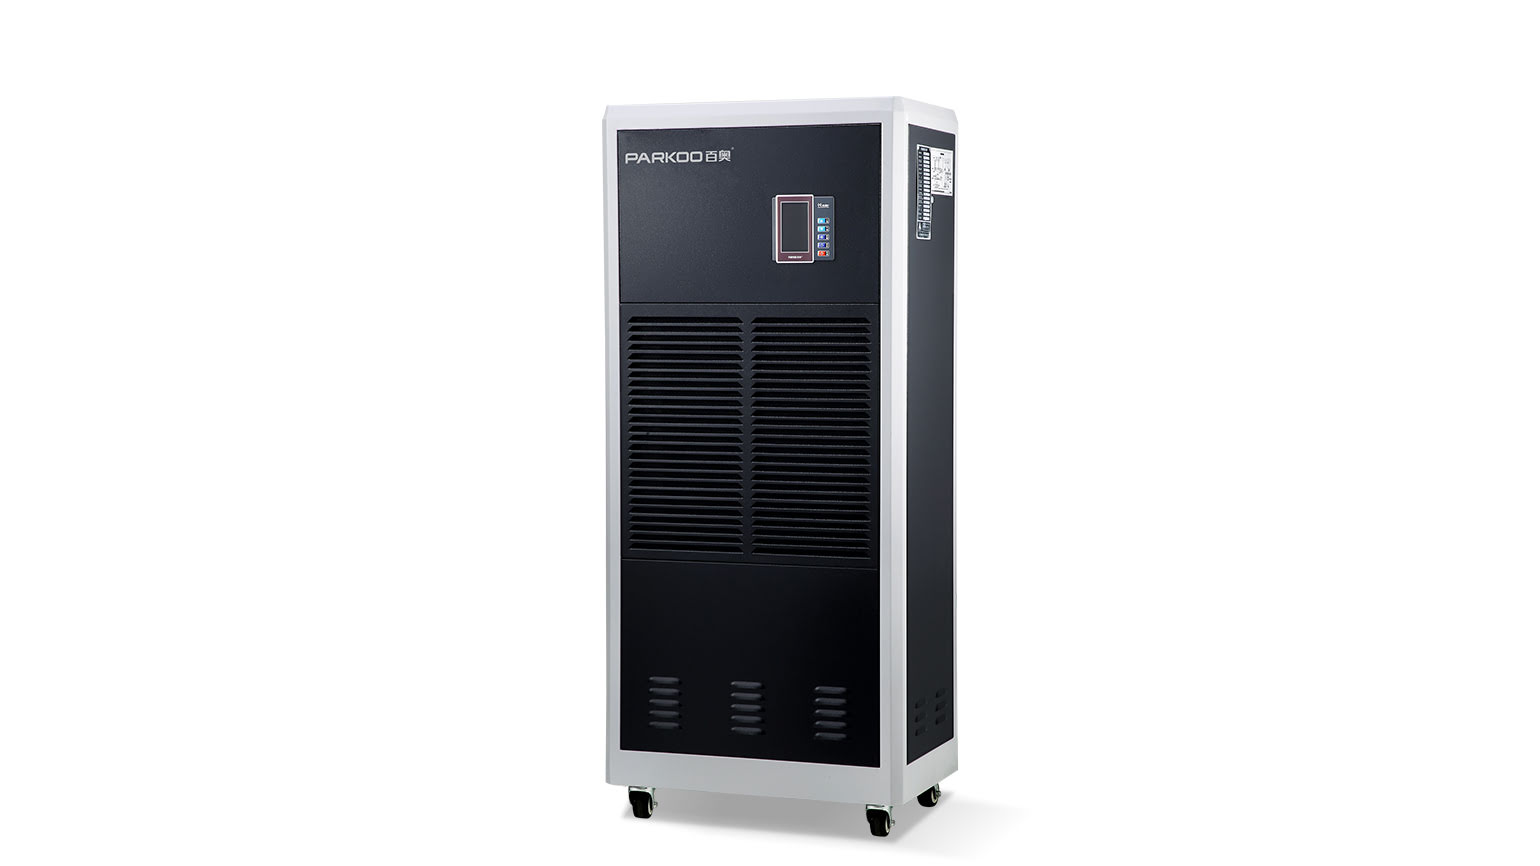 Archives dehumidifier dehumidifies and prevents moisture, safeguarding paper documents from damage